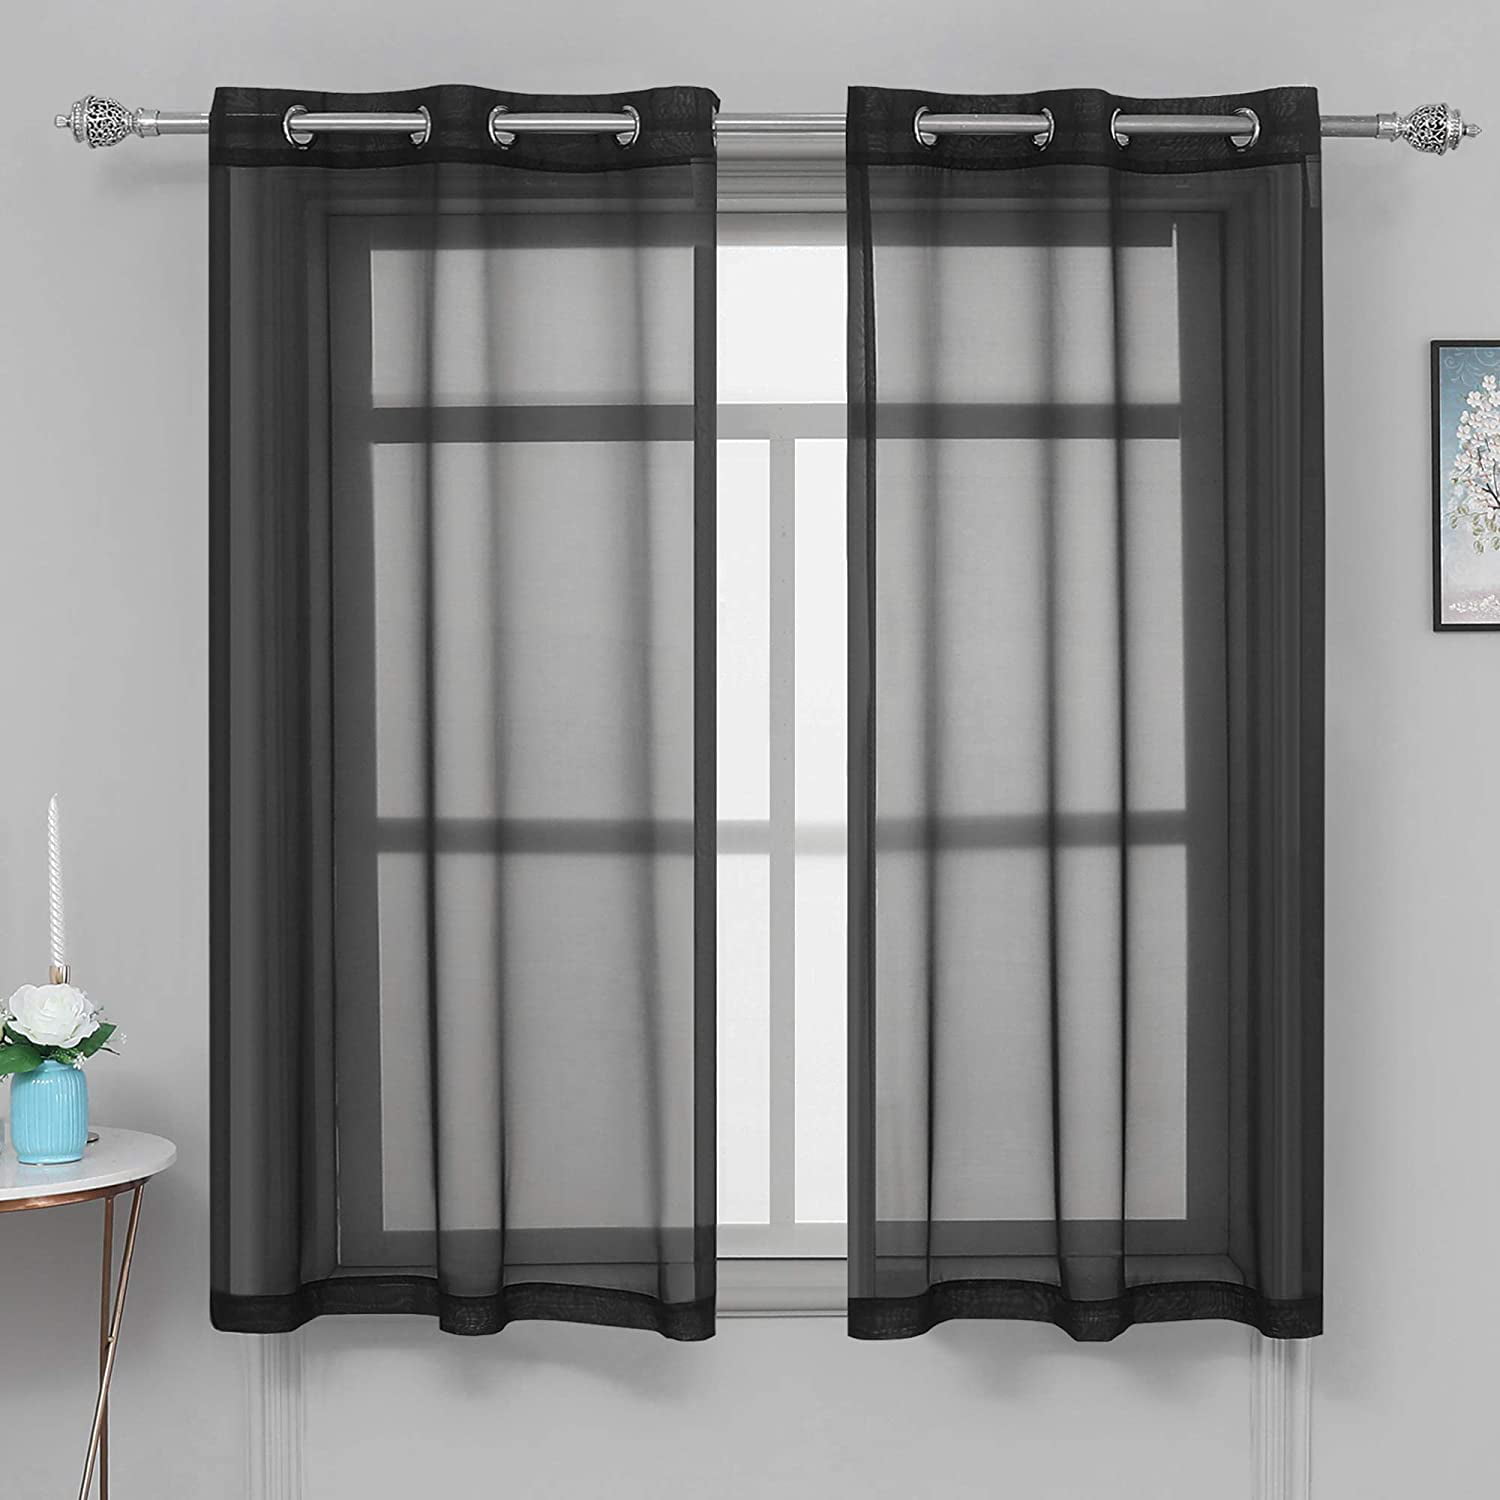 MIULEE 2 Panels Solid Color Black Sheer Curtains Elegant Grommet Top Window Voile Panels//Drapes//Treatment for Bedroom Living Room 54X63 Inches